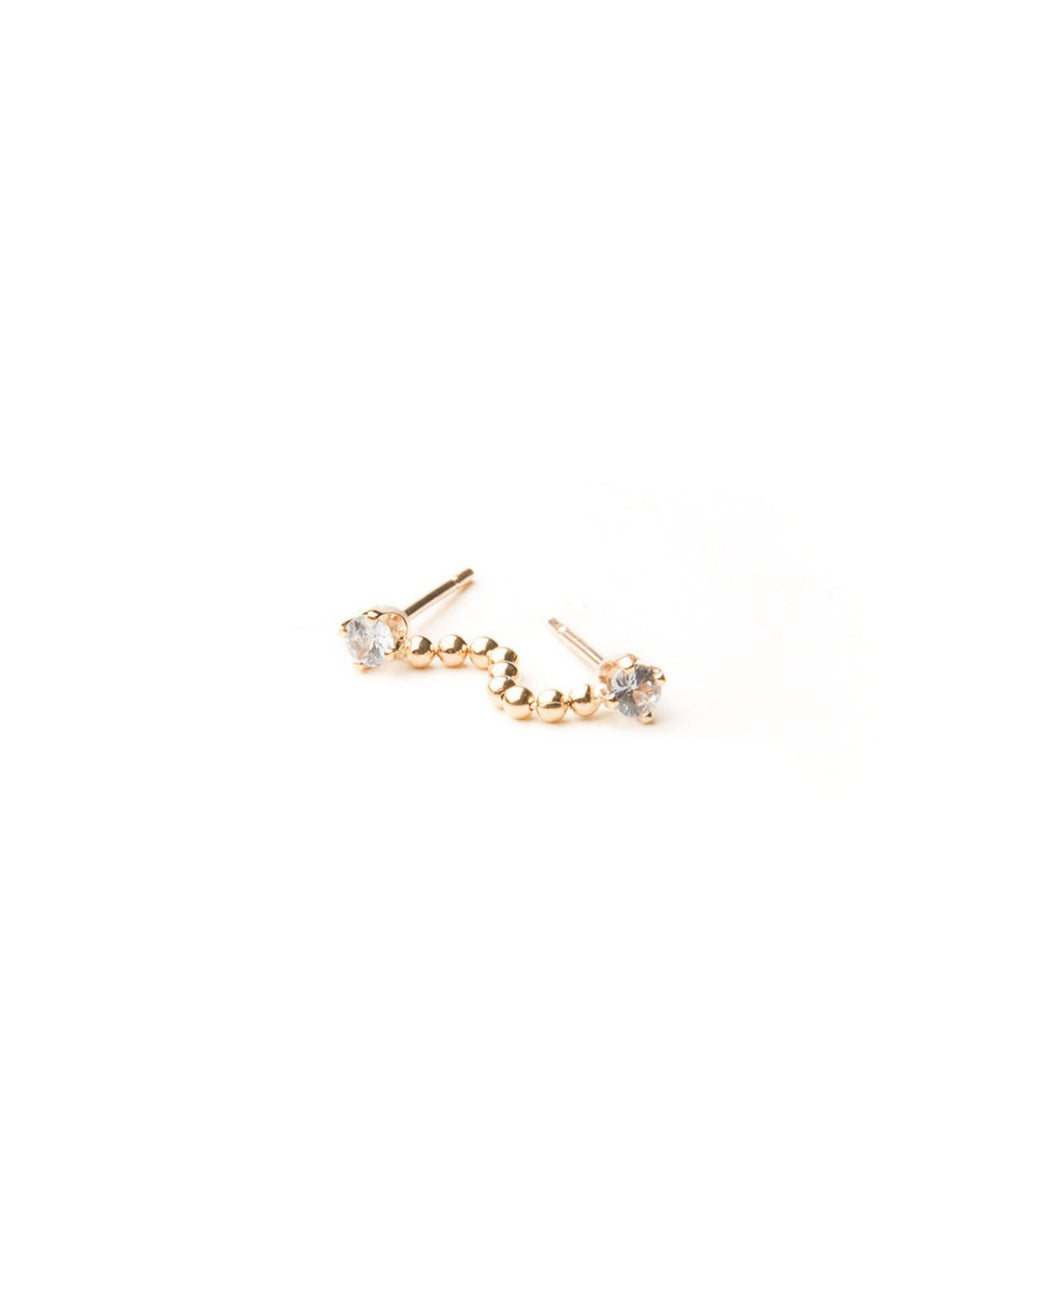 Anna Earring | 14k Yellow Gold + Sapphire Chain Stud | by Winden — ANOMIE